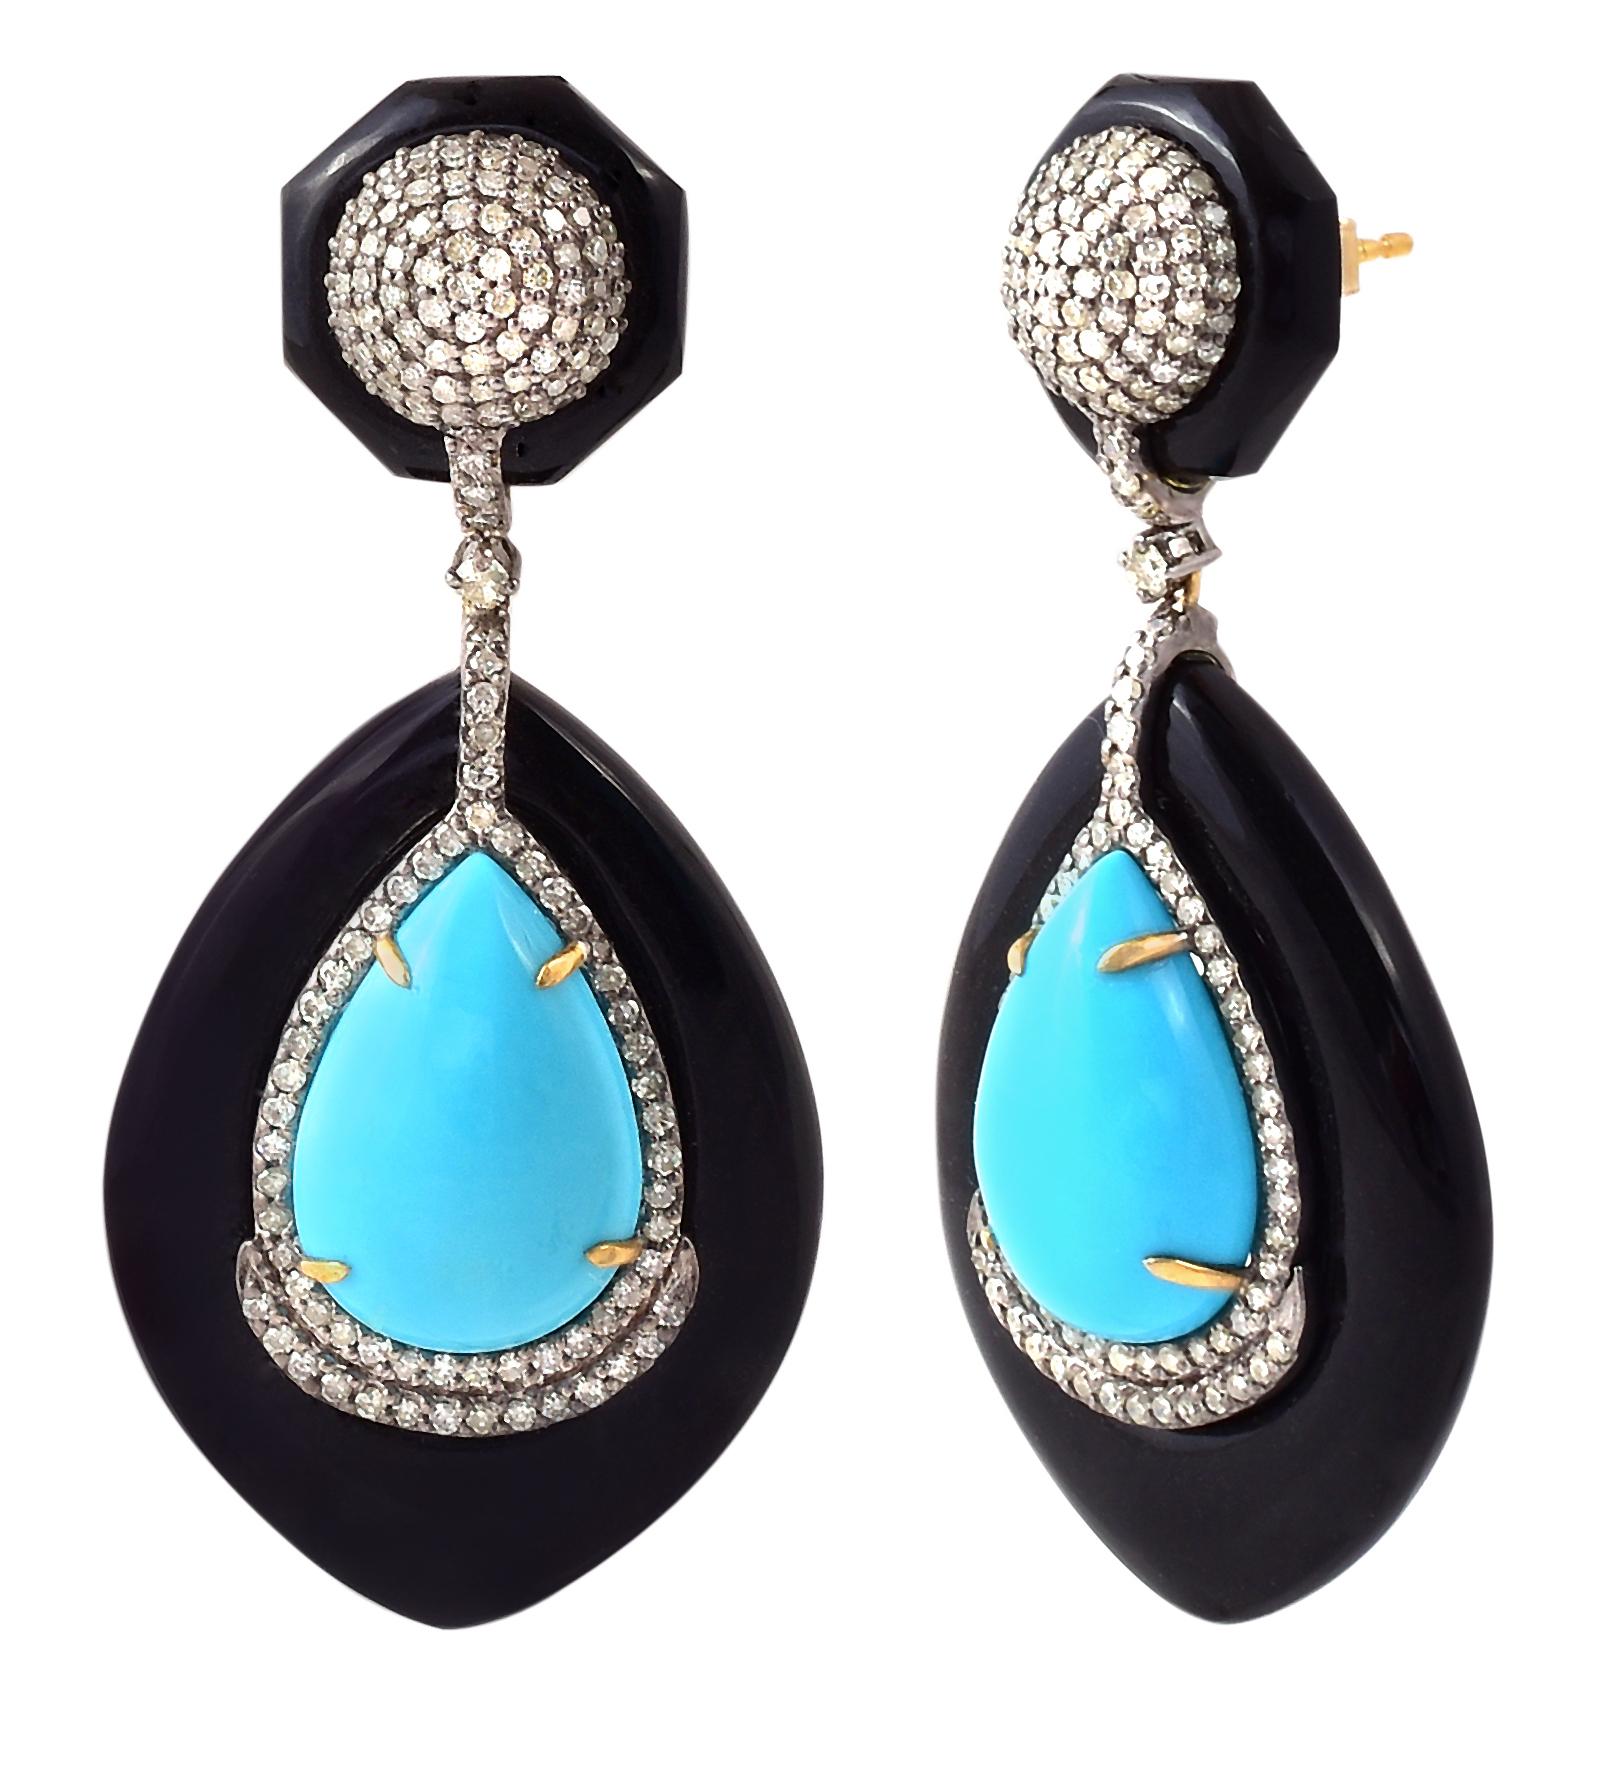 65.08 Carat Turquoise, Black Onyx, and Diamond Dangle Earrings in Contemporary Victorian Style

This Victorian-era inspired art-deco glorious celeste turquoise, black onyx, and diamond earring pair is exceptional. The solitaire pear shaped turquoise